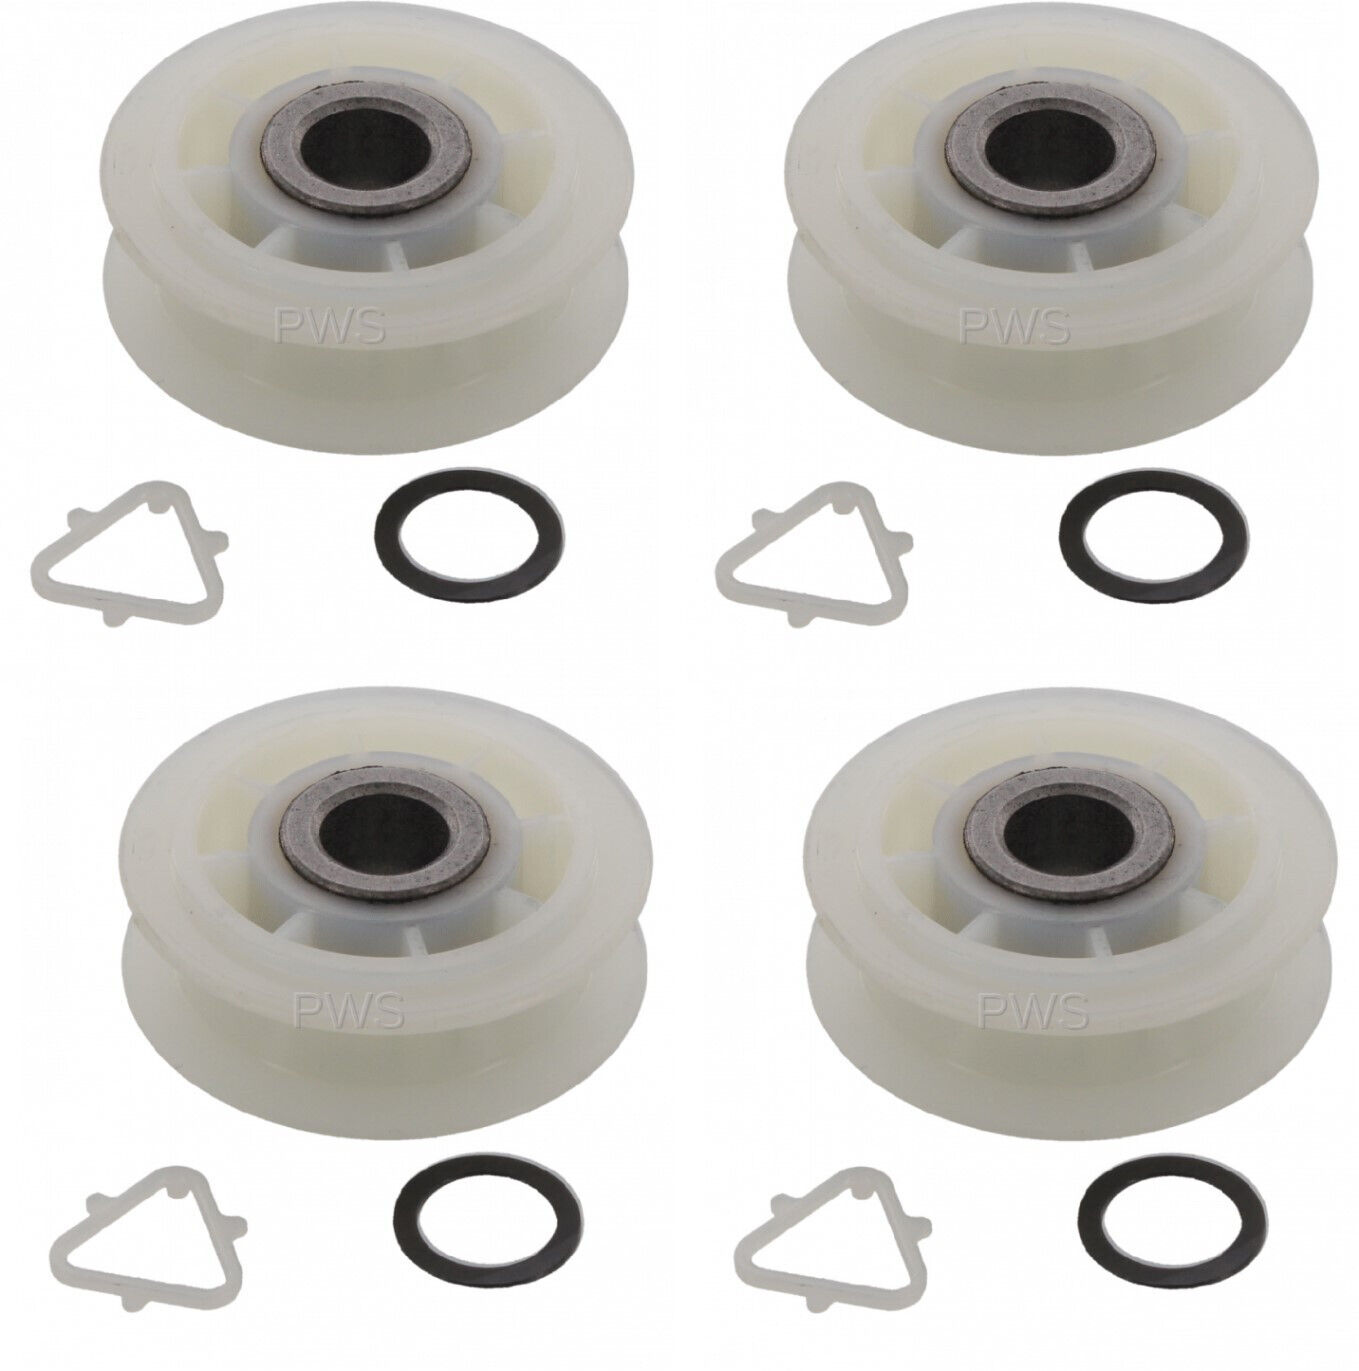 279640 Compatible Dryer Idler Pulley Roller for Whirlpool Kenmore New 4 Pack Scaroo 279640 - фотография #3